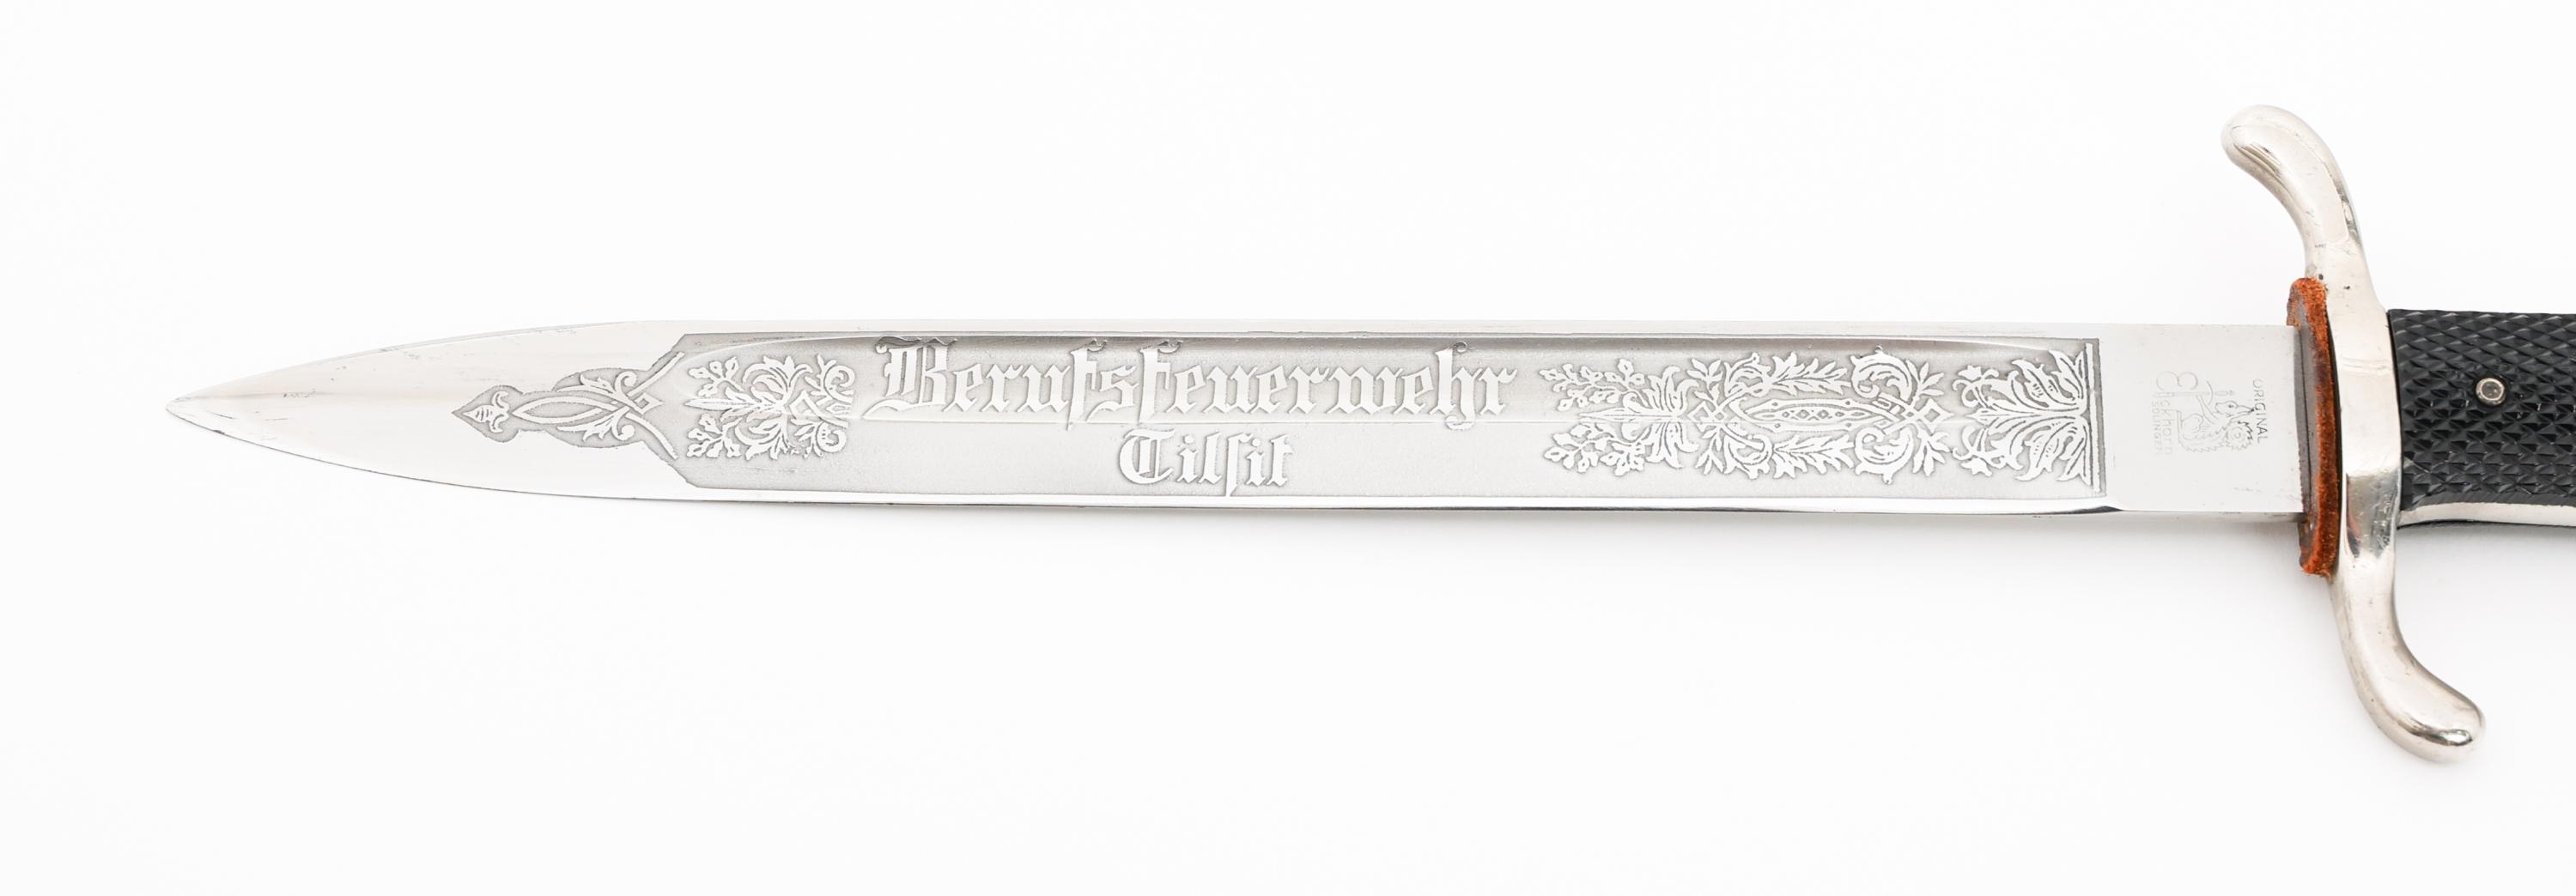 WWII GERMAN FIRE POLICE ETCHED BAYONET